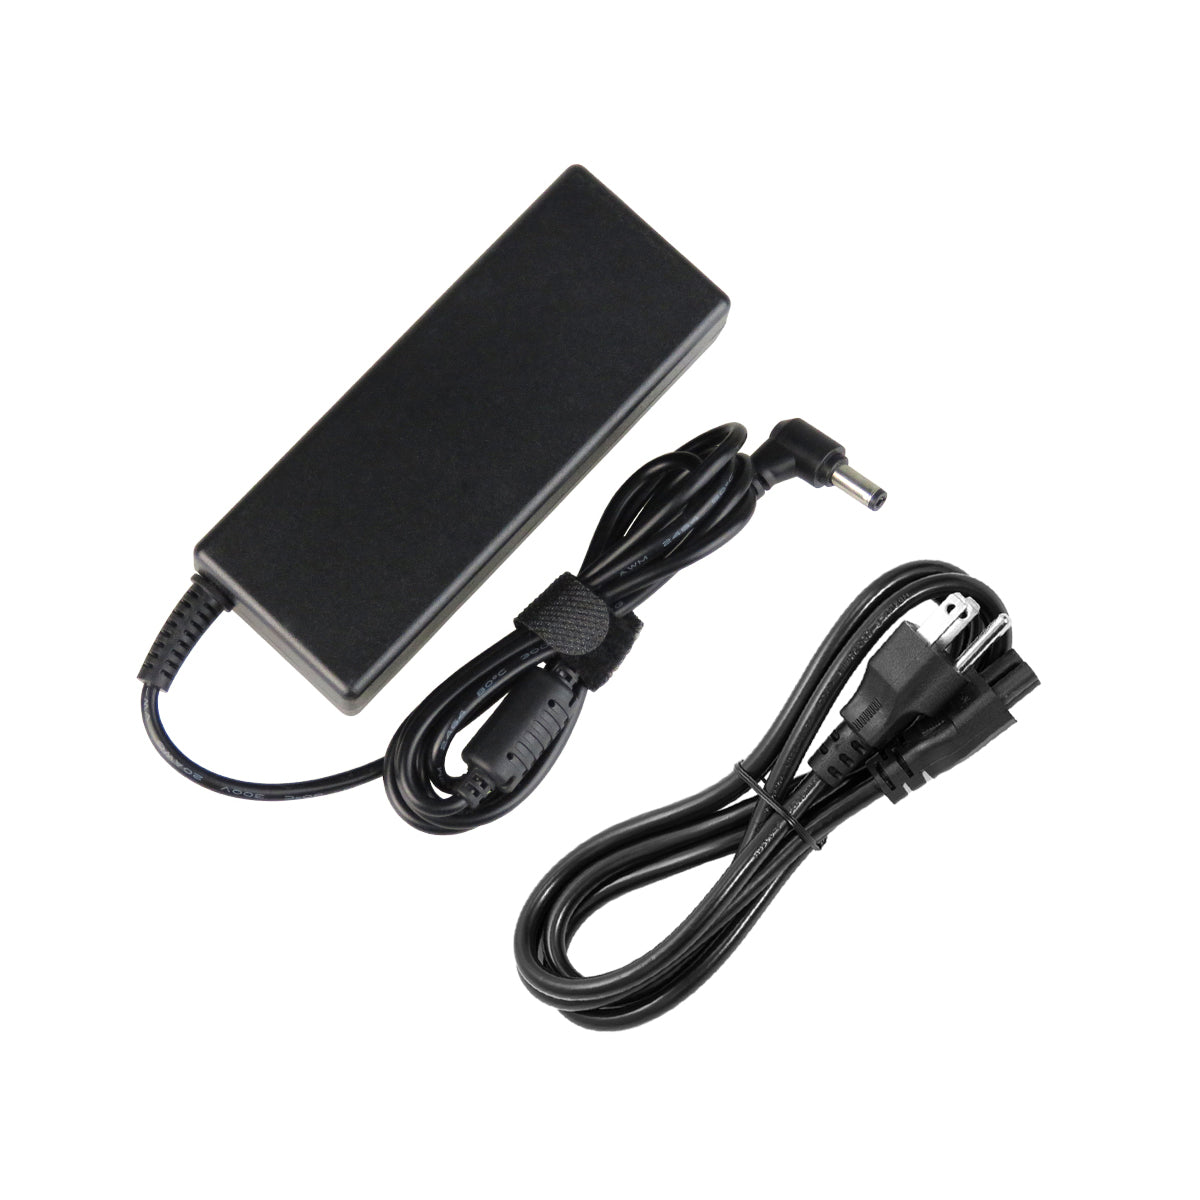 AC Adapter Charger for ASUS X55CR Notebook.